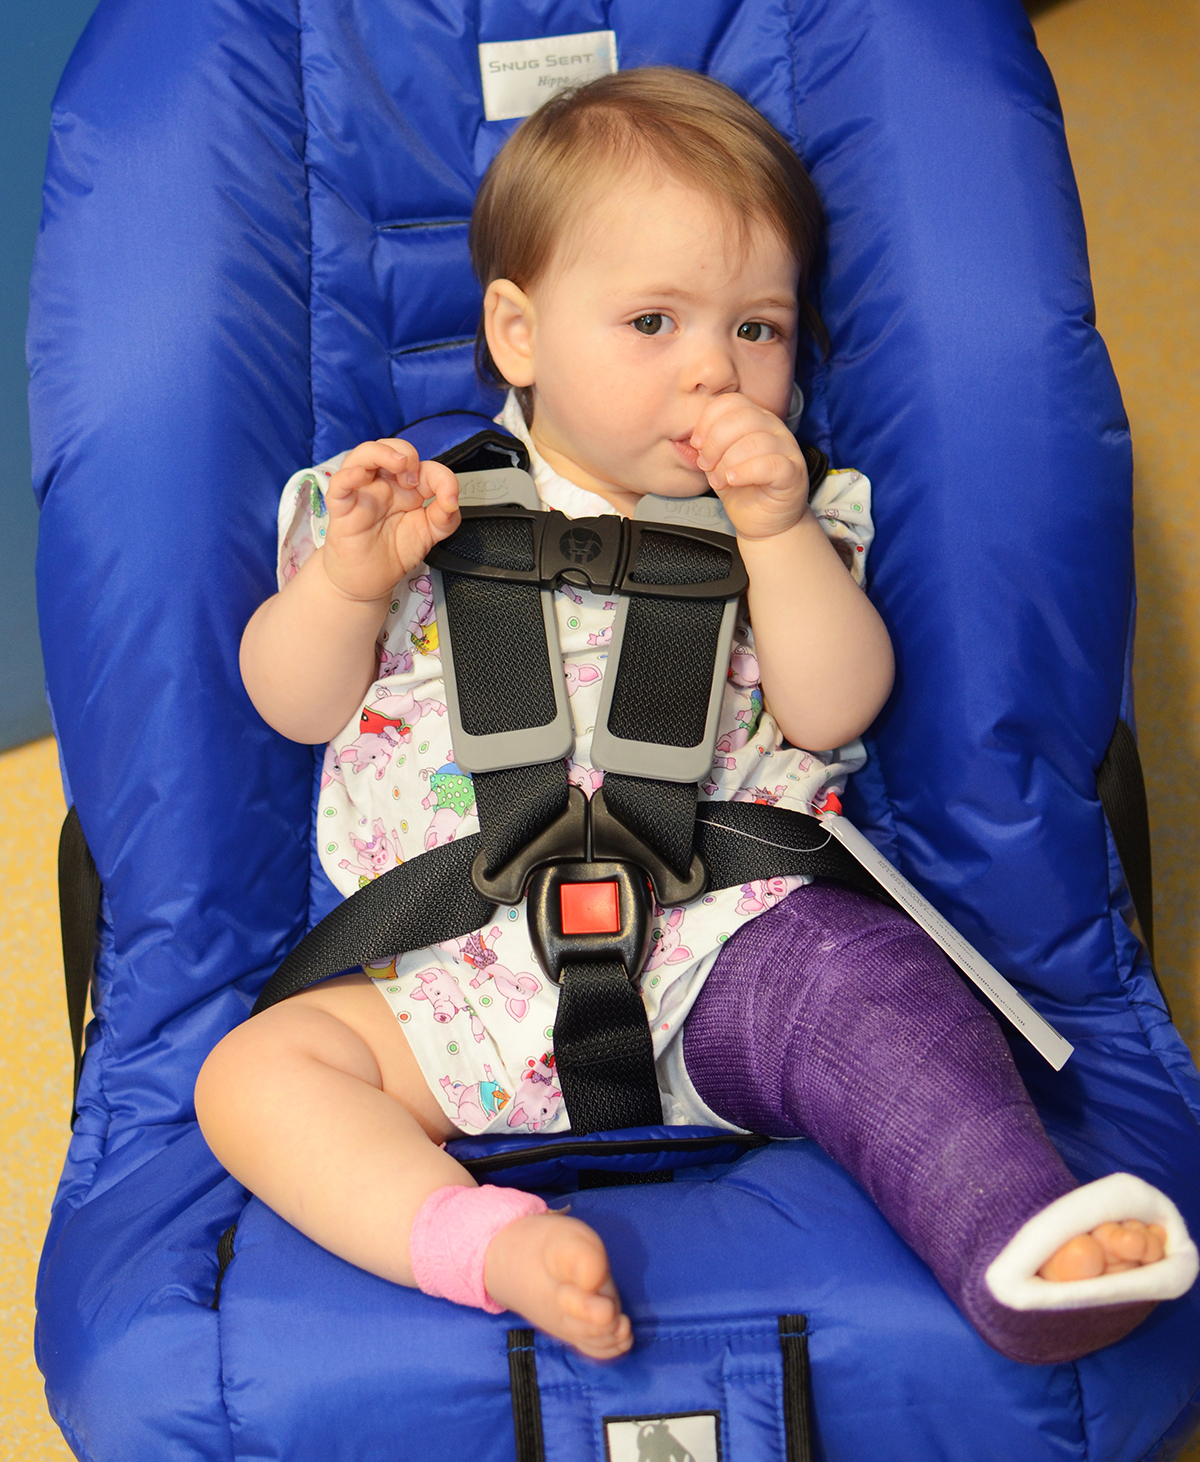 Scottish Rite for Children occupational therapy patient in leg cast